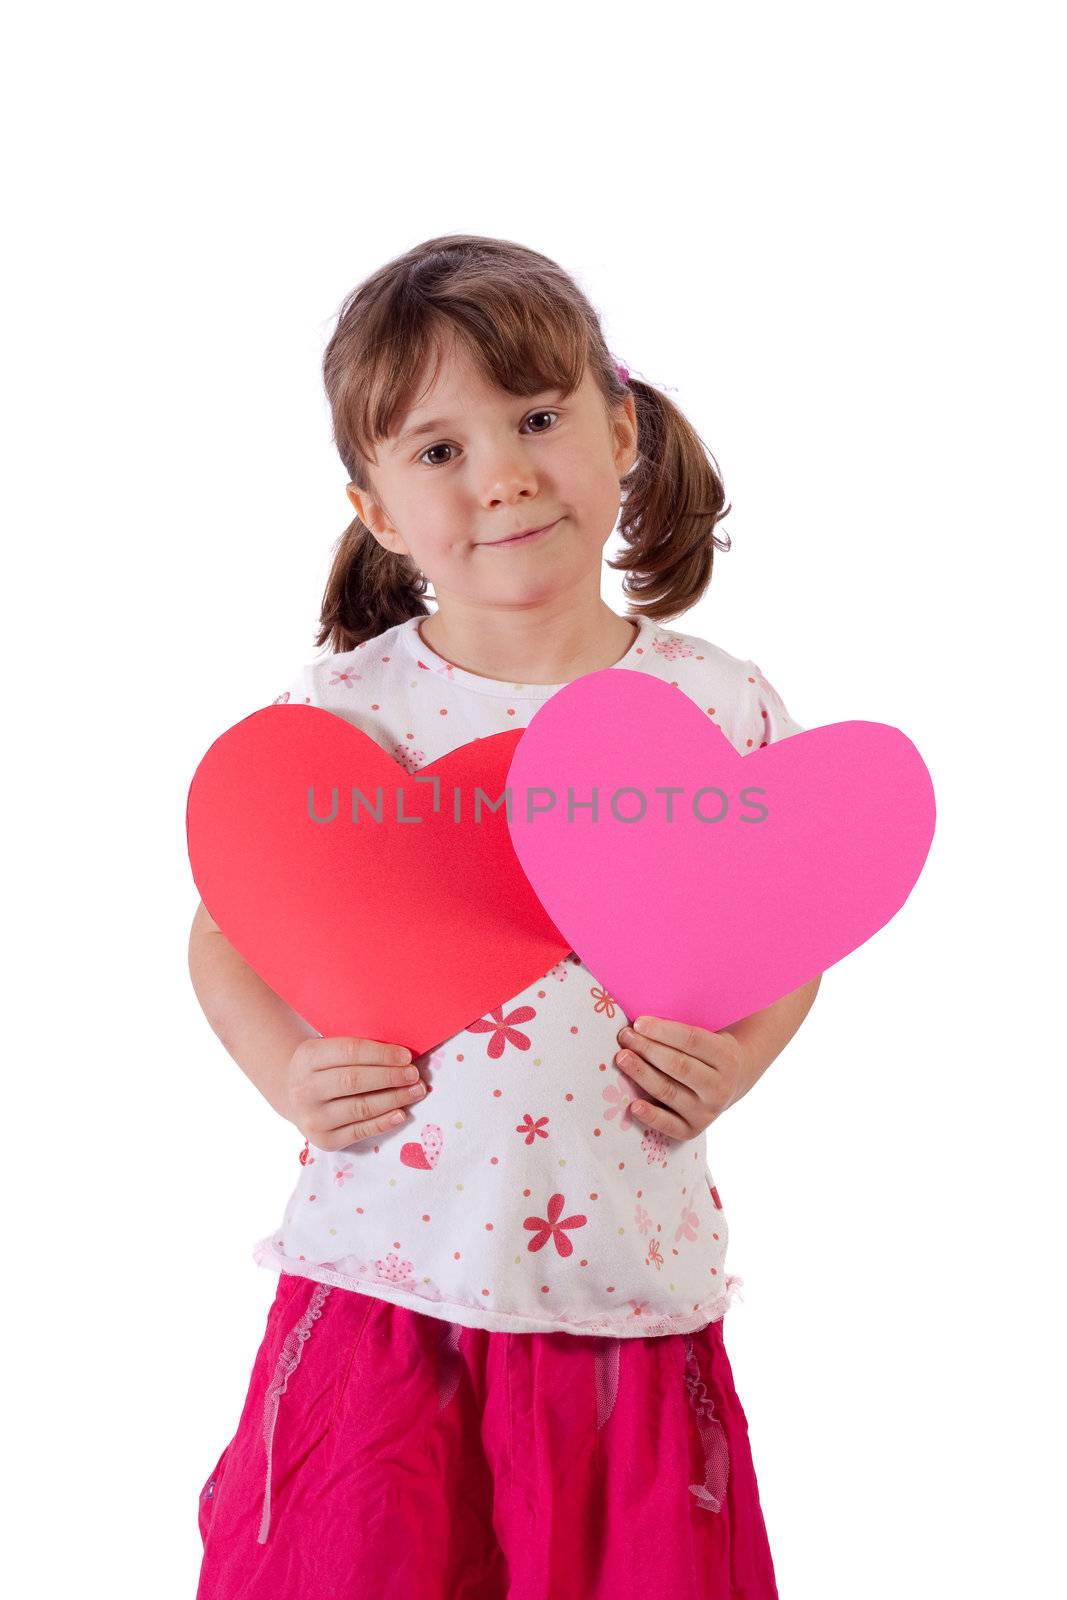 Cute little girl holding two hearts